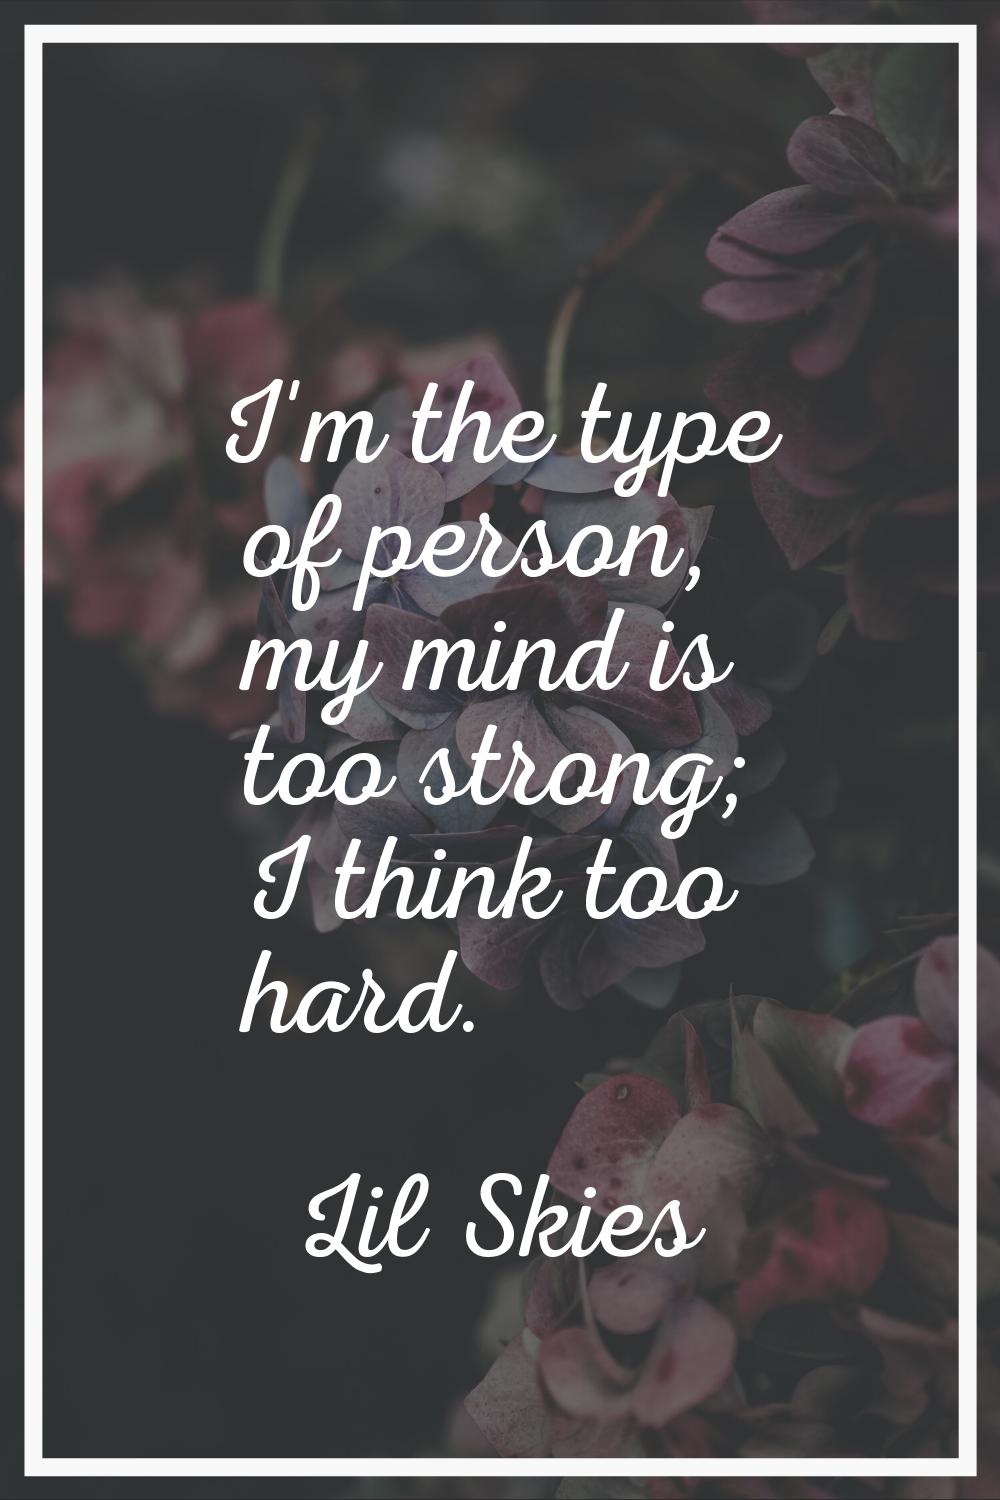 I'm the type of person, my mind is too strong; I think too hard.